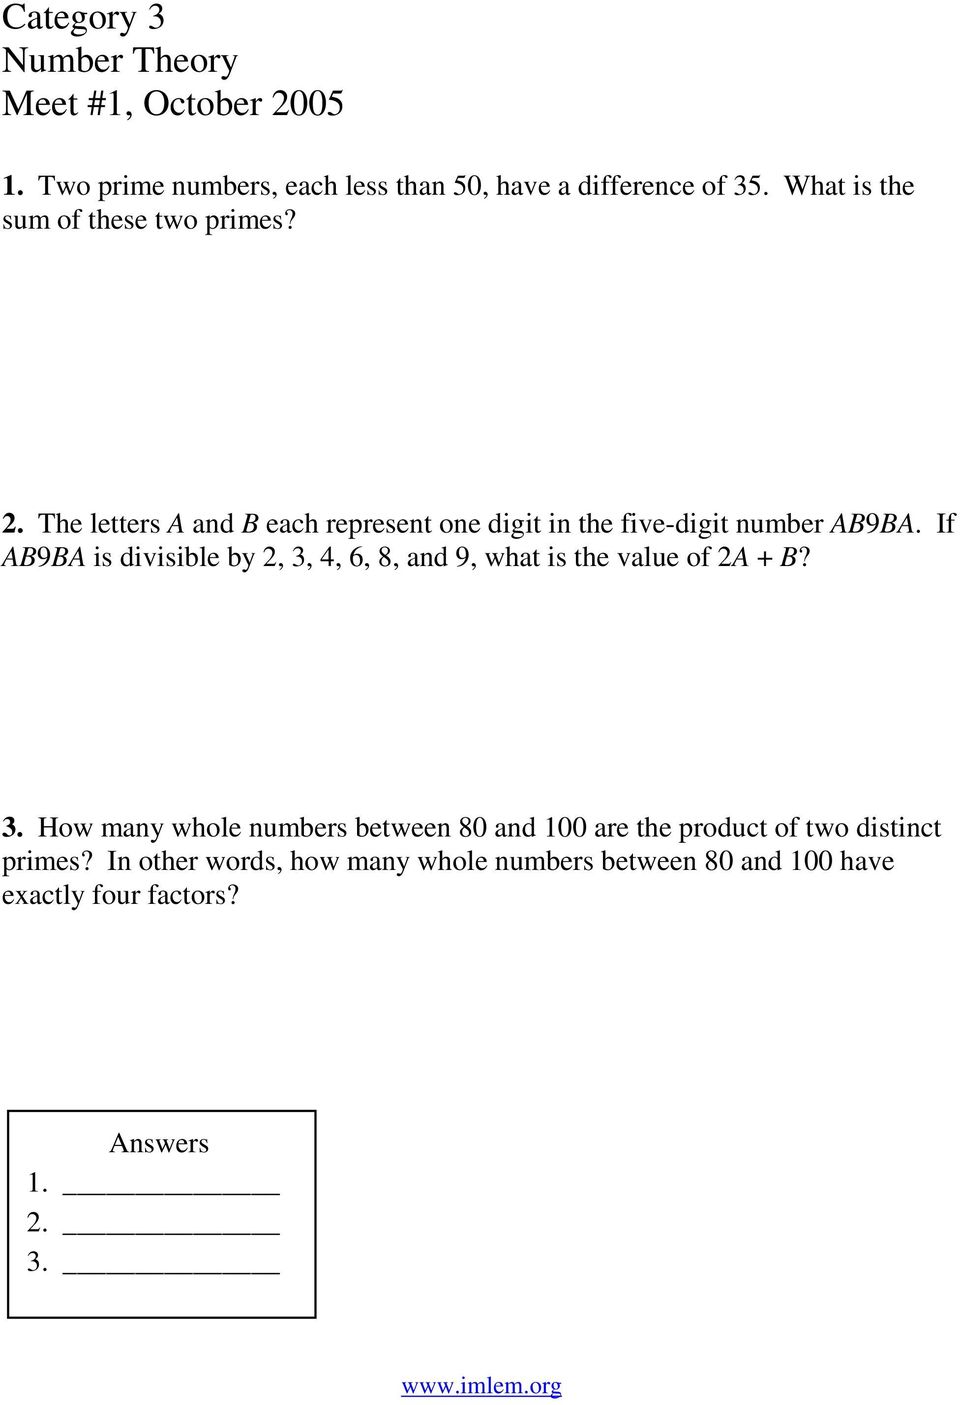 If AB9BA is divisible by 2, 3, 4, 6, 8, and 9, what is the value of 2A + B? 3. How many whole numbers between 80 and 100 are the product of two distinct primes?